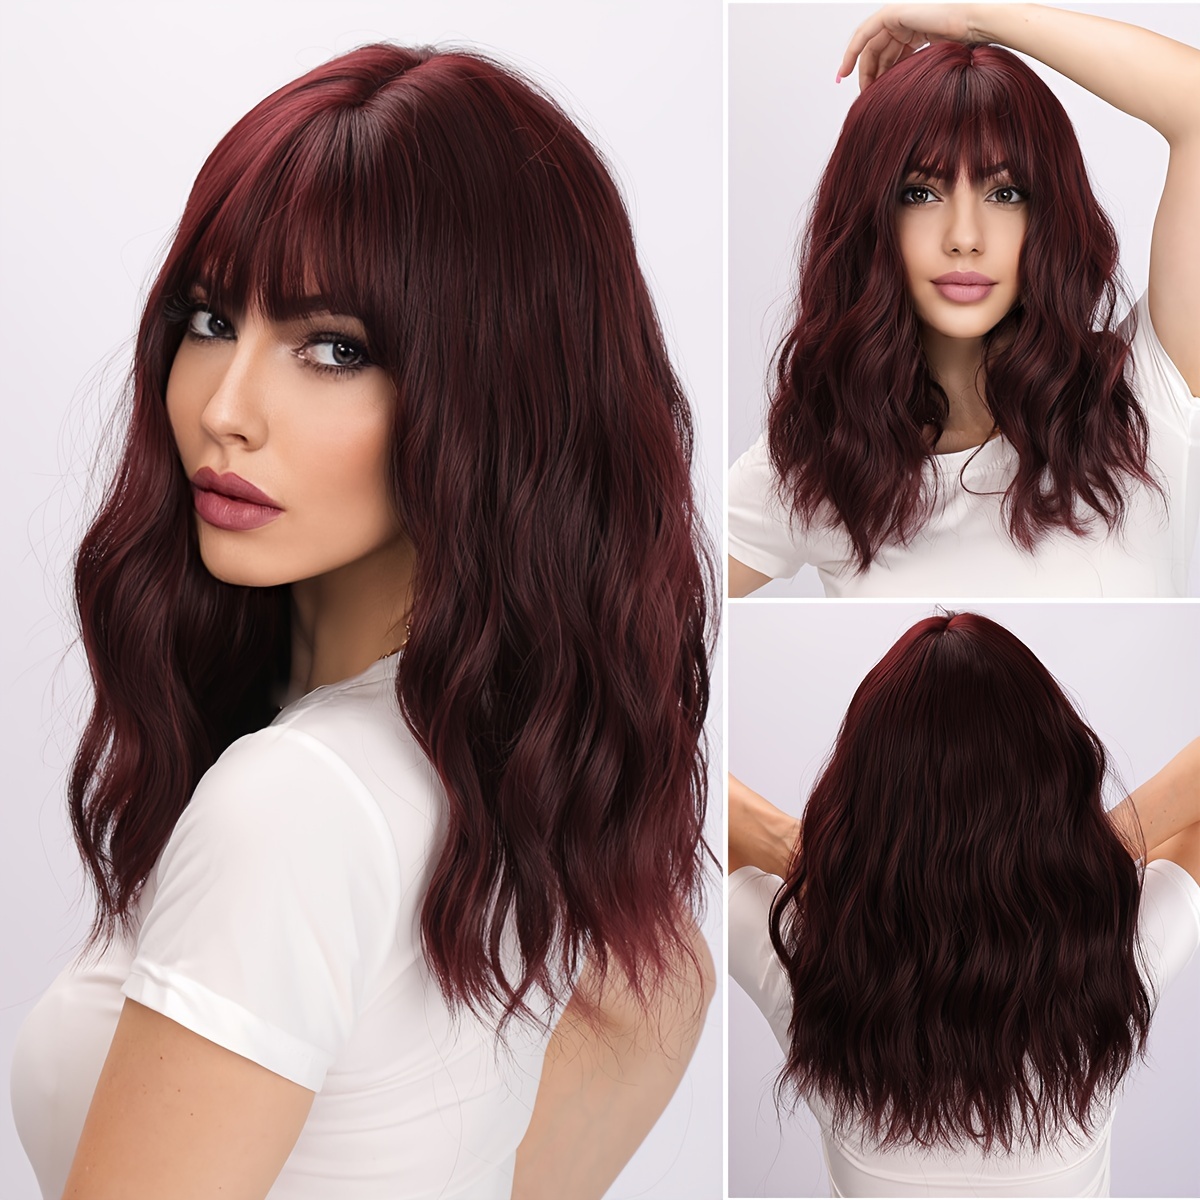 

14 Inch Red Charming Bangs Wig - Curly, Heat-resistant - Perfect For Role-playing And Parties - Durable Seamless Edging Synthetic Fiber